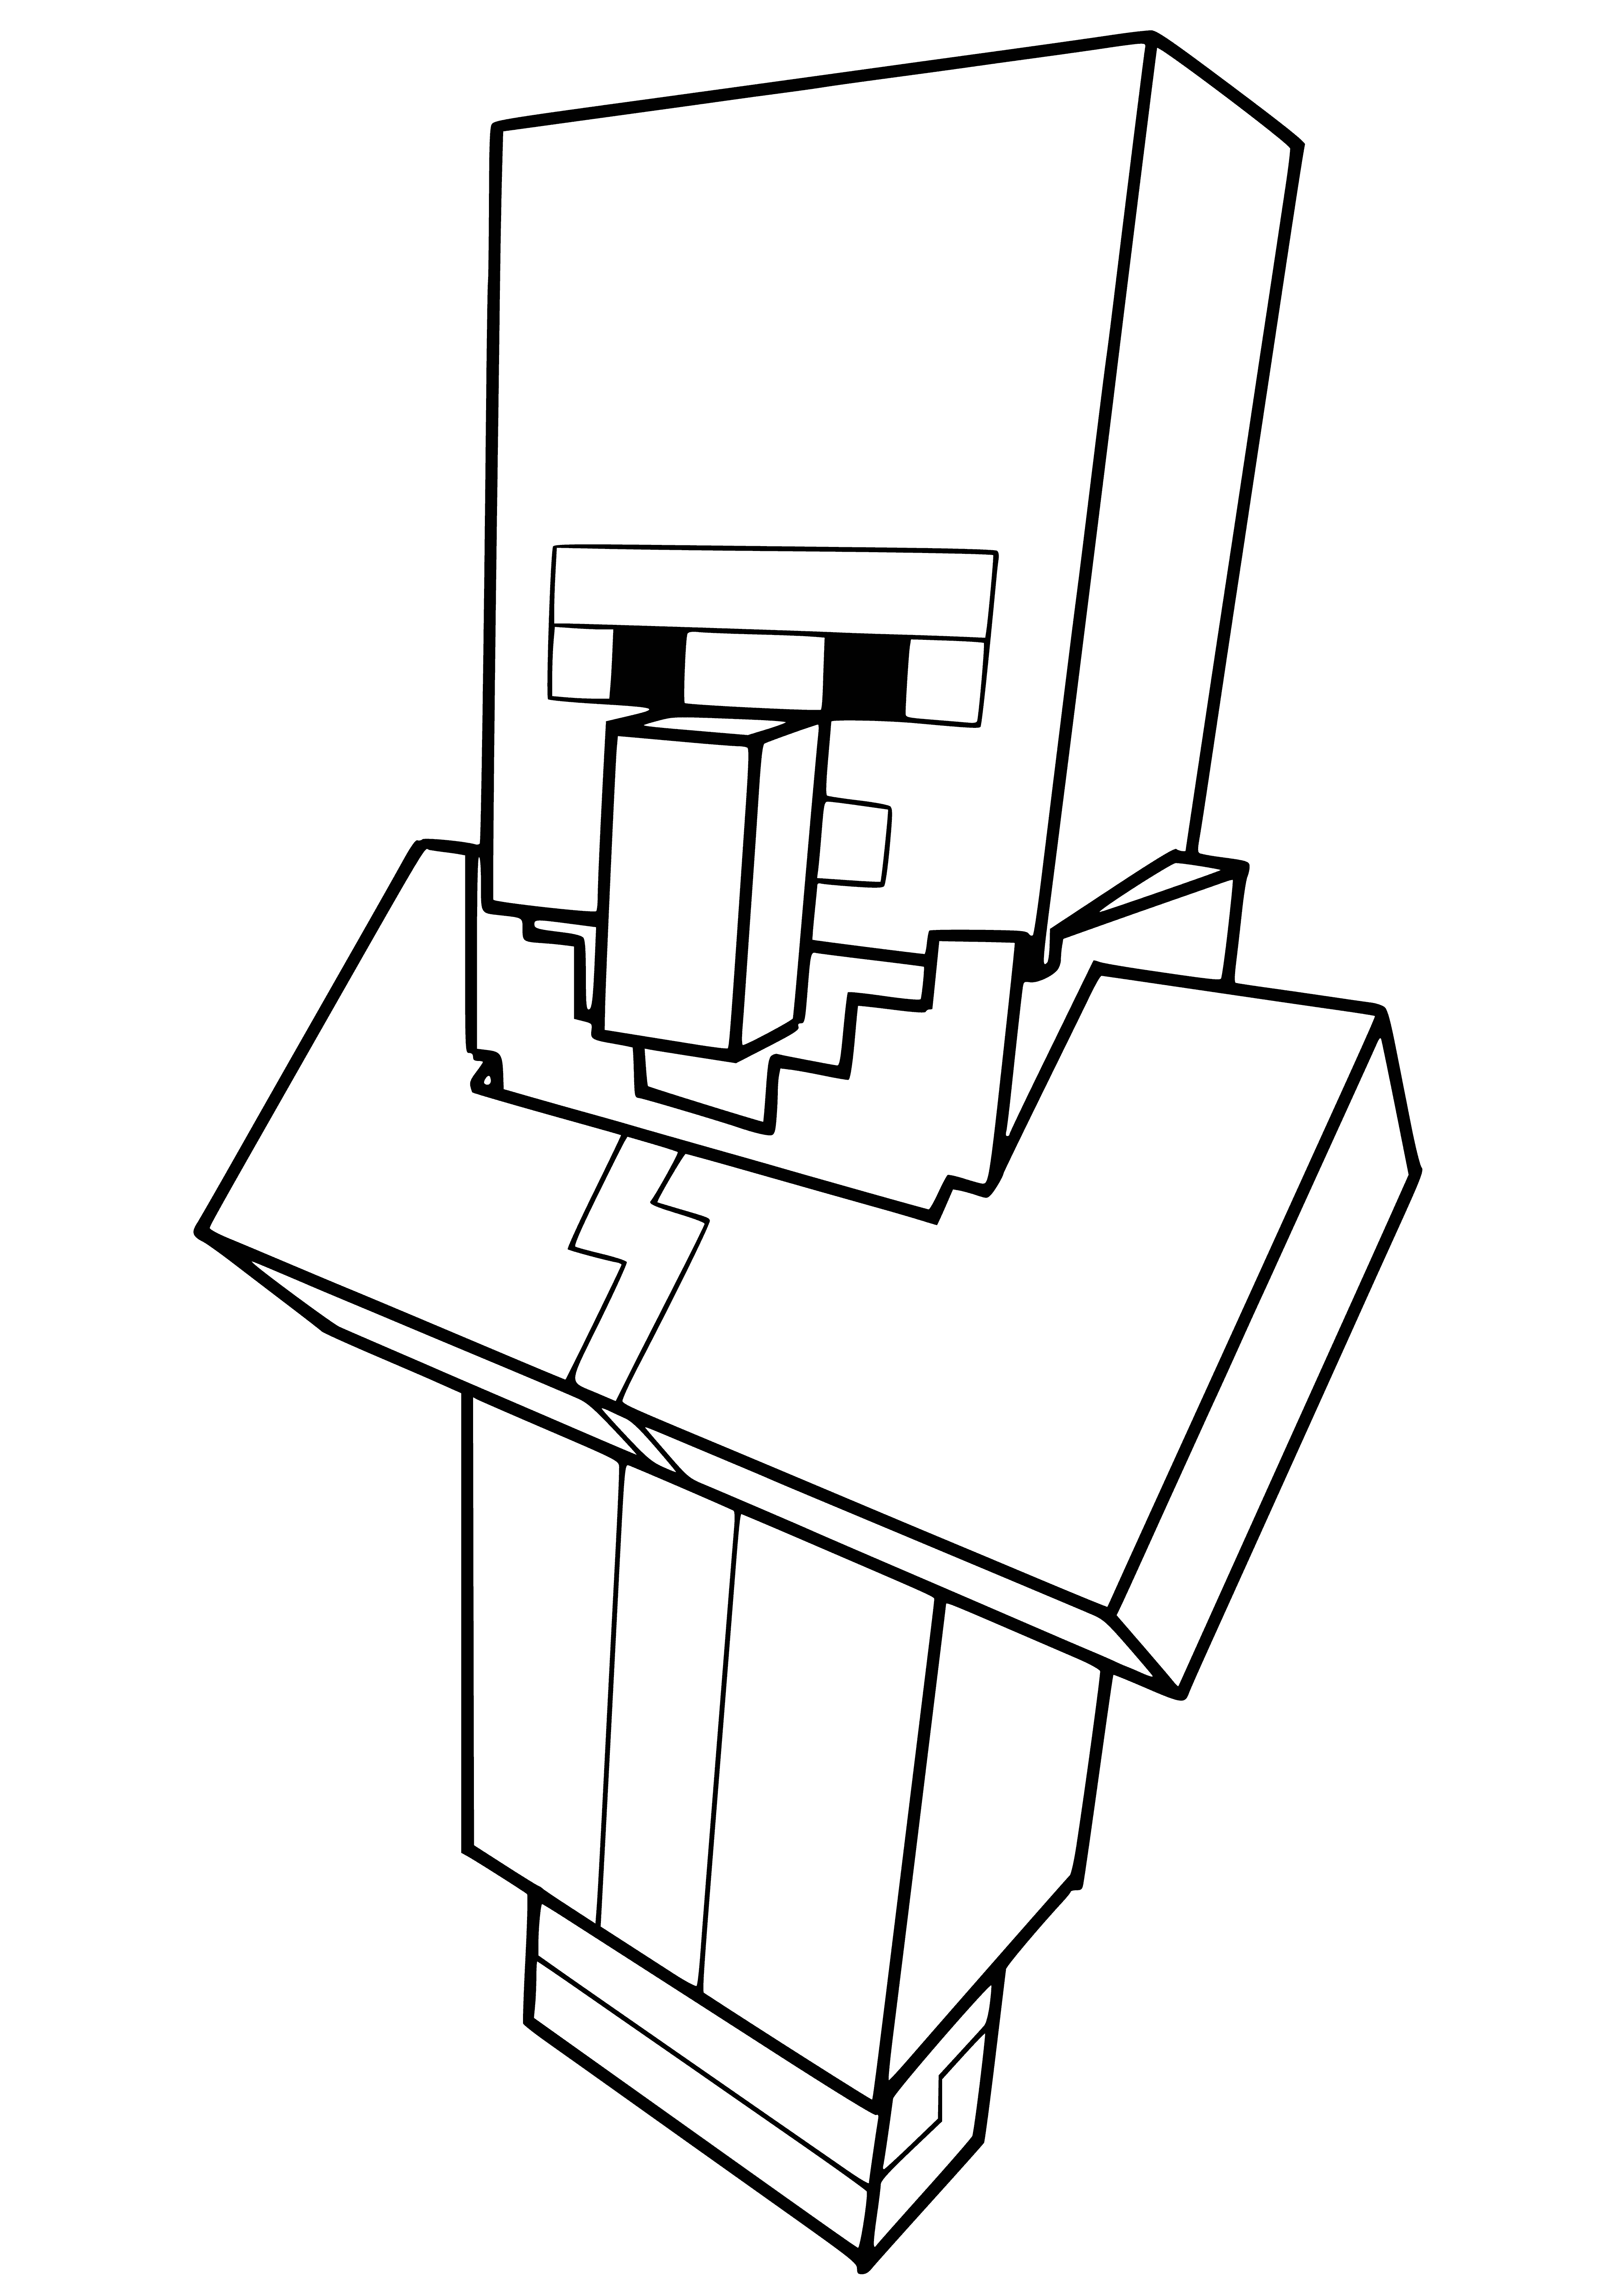 coloring page: Minecraft villager has brown beard/mustache, wears brown robe/white apron, holds loaf of bread - interact with him to get items & trade.